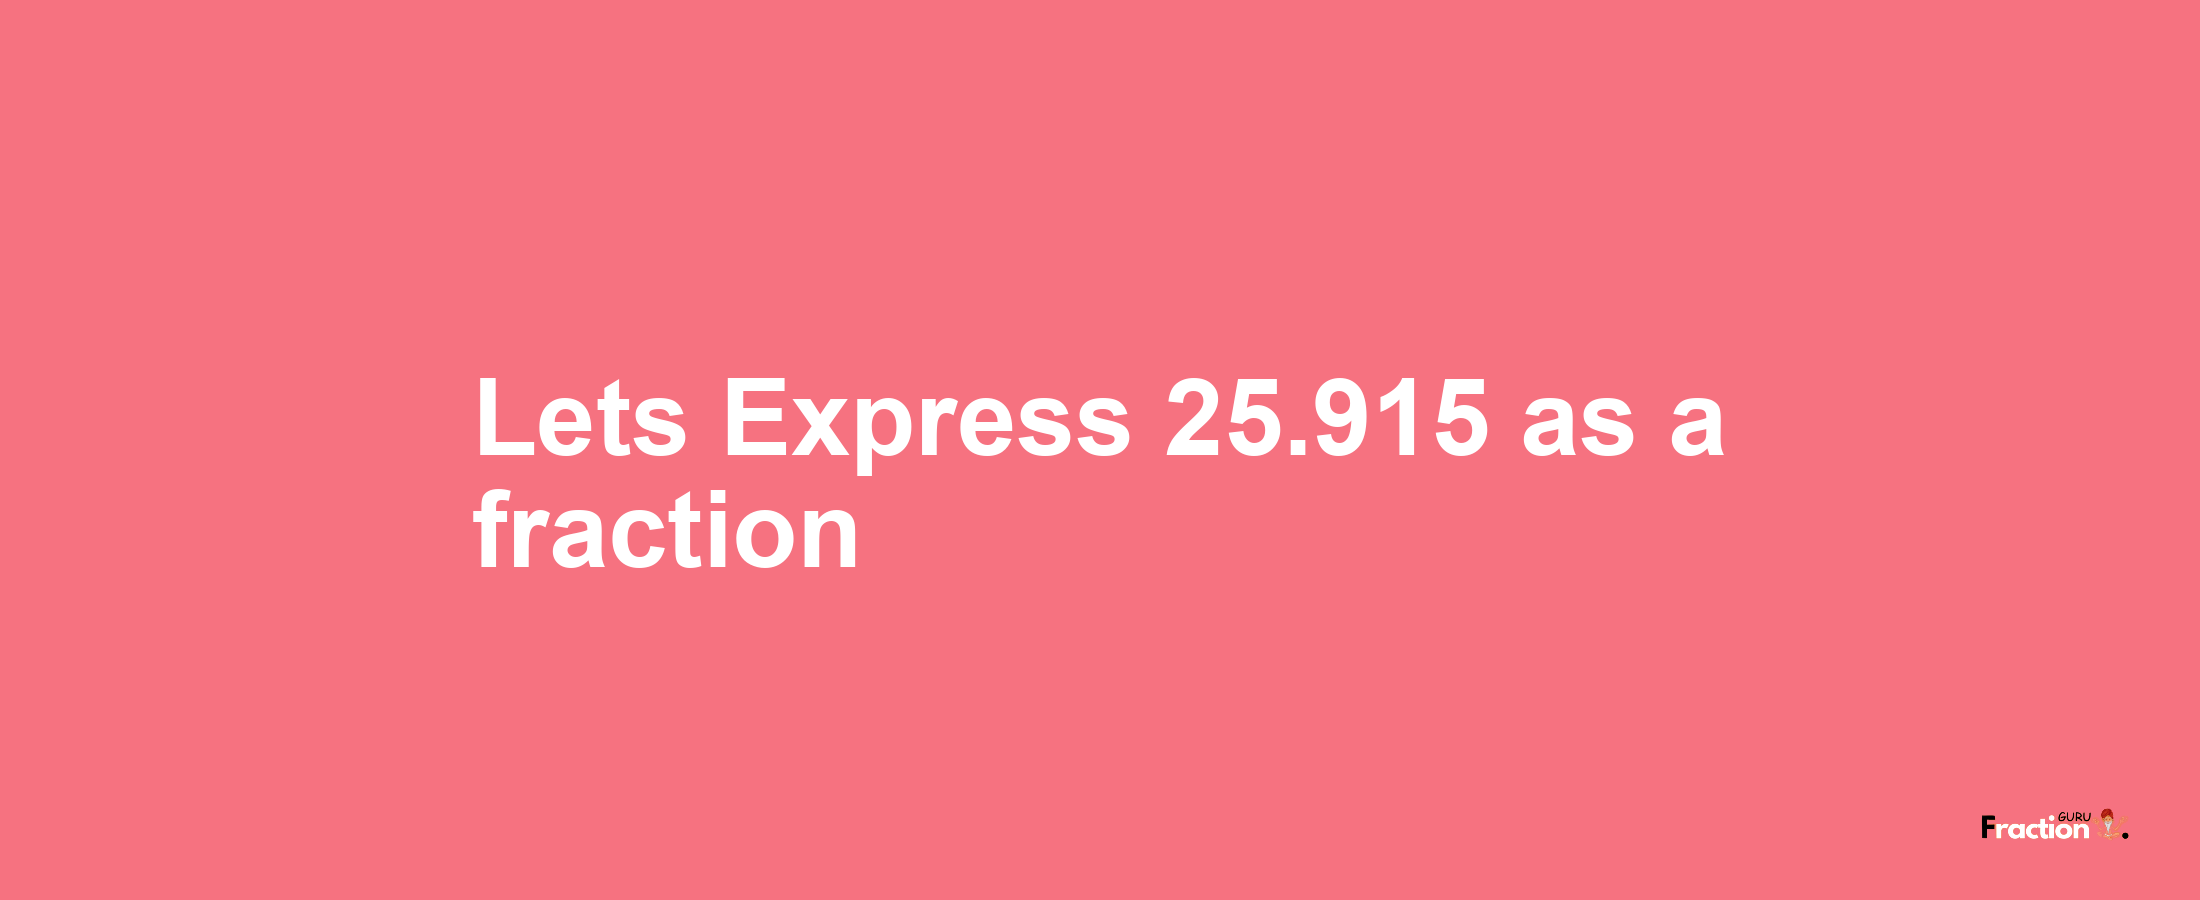 Lets Express 25.915 as afraction